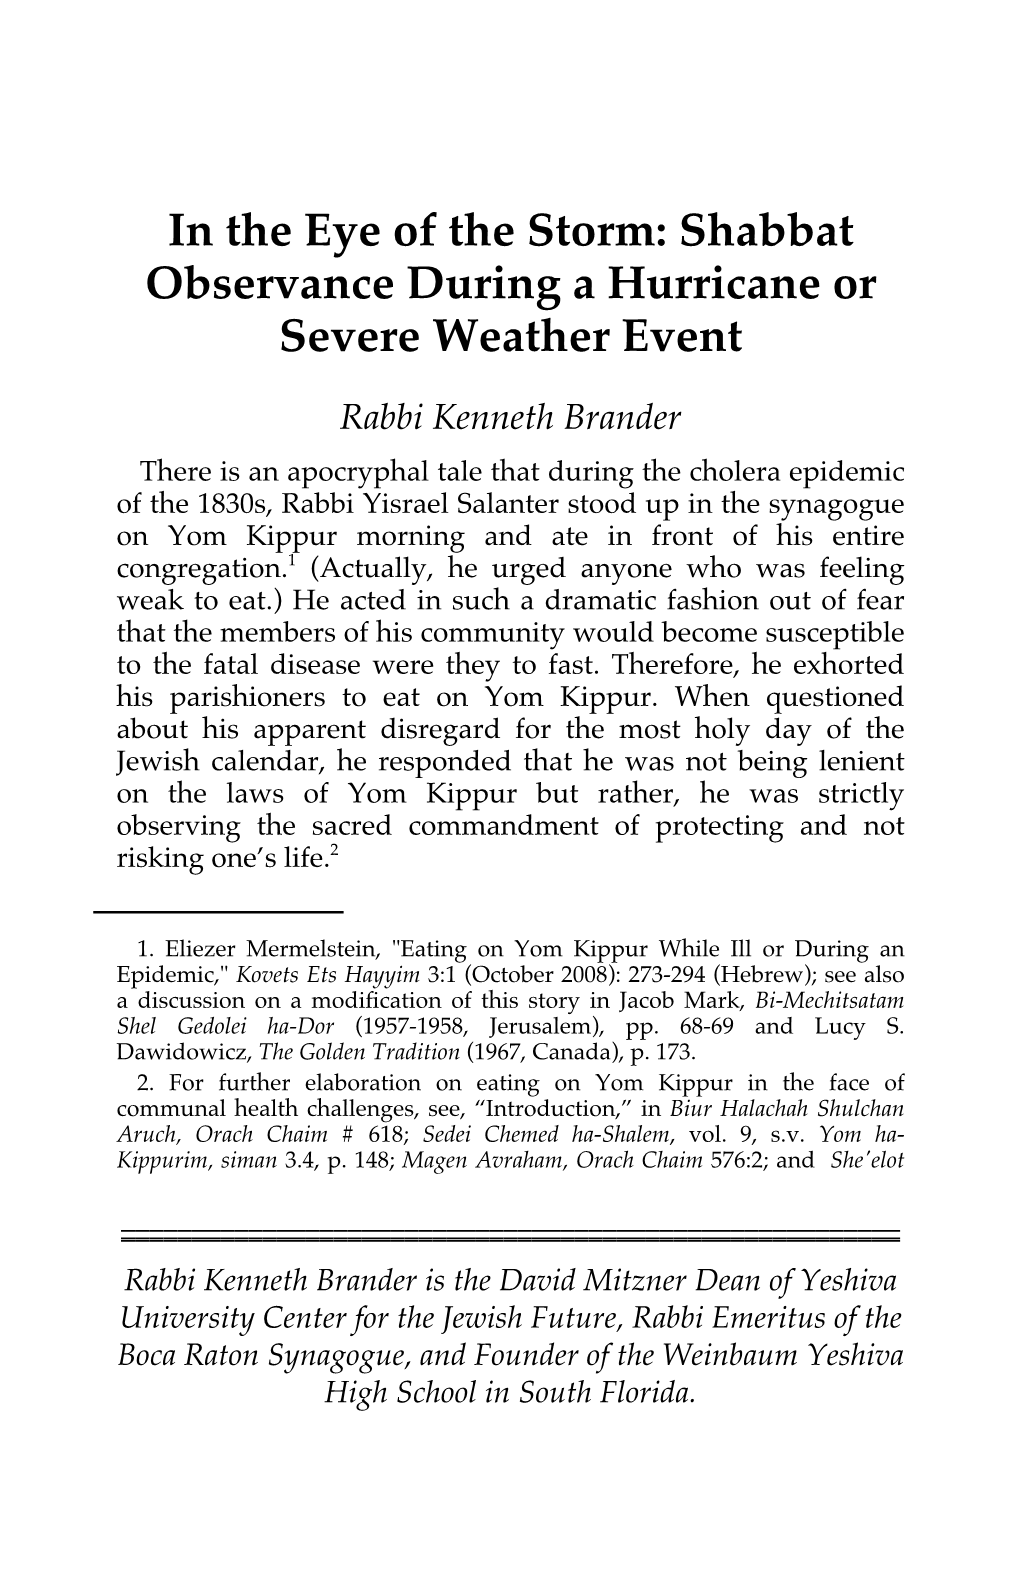 In the Eye of the Storm: Shabbat Observance During a Hurricane Or Severe Weather Event